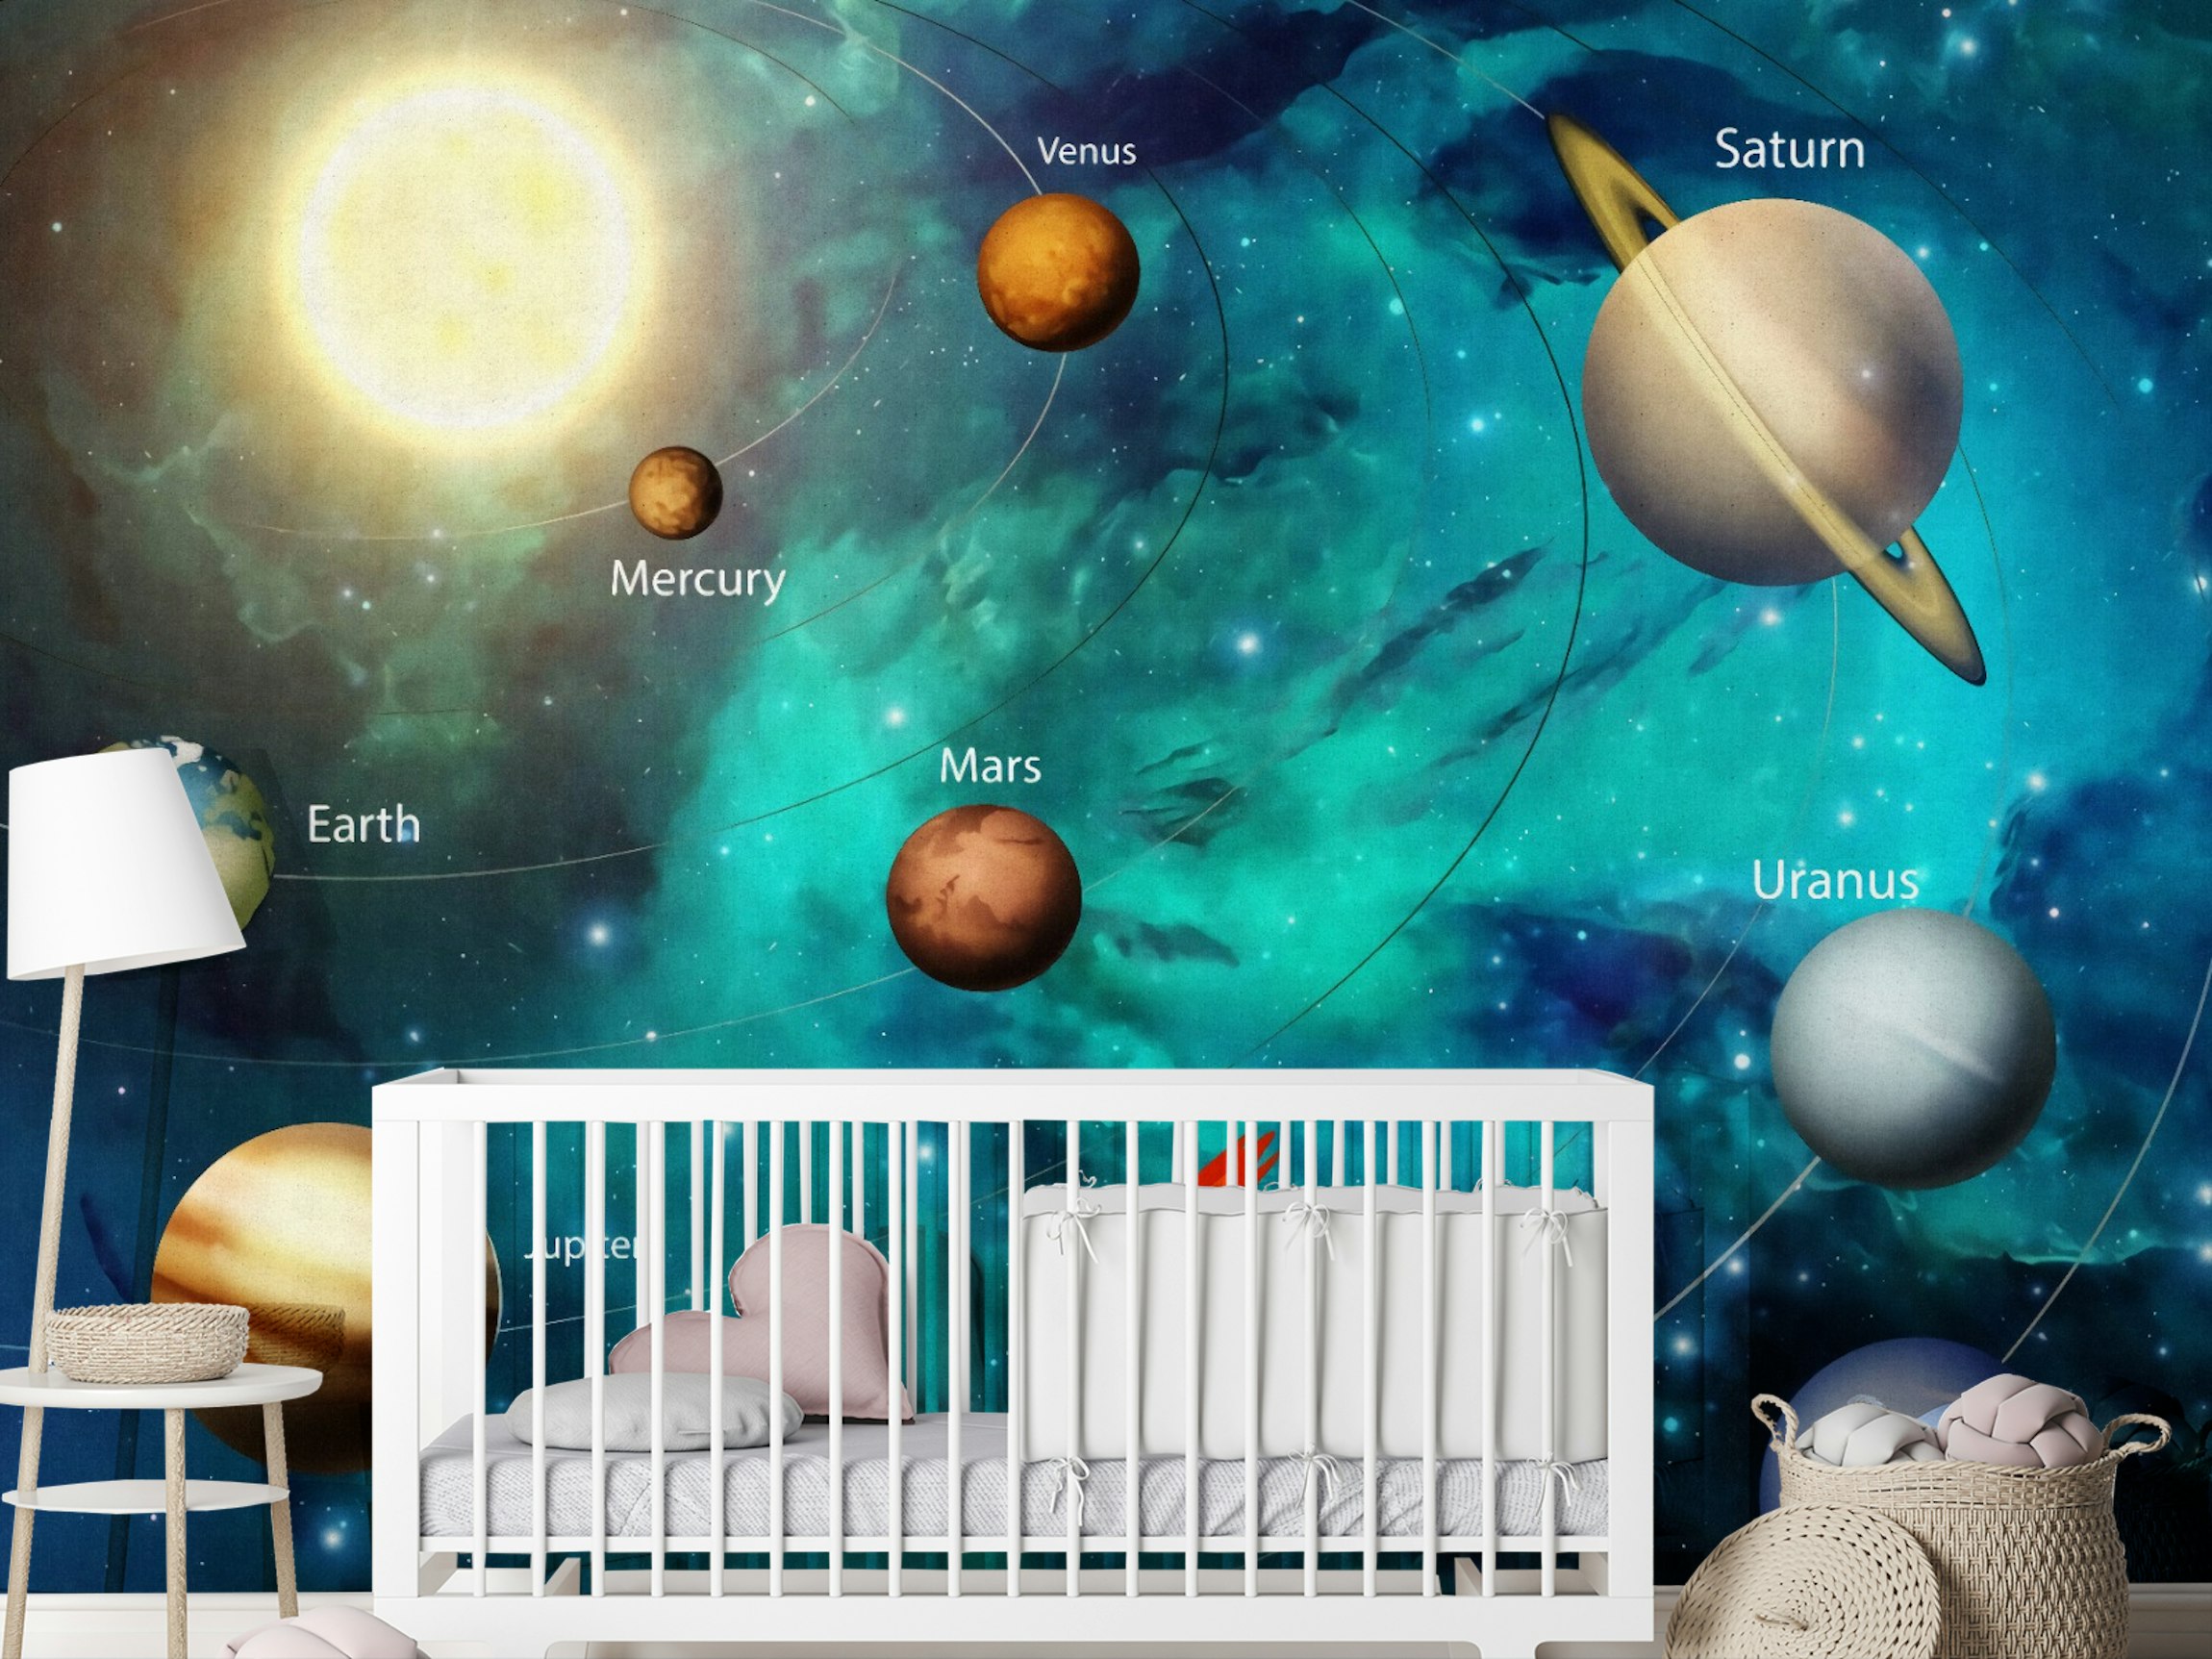 SOLAR SYSTEM FOR KIDS WITH SUN Planet' Sticker